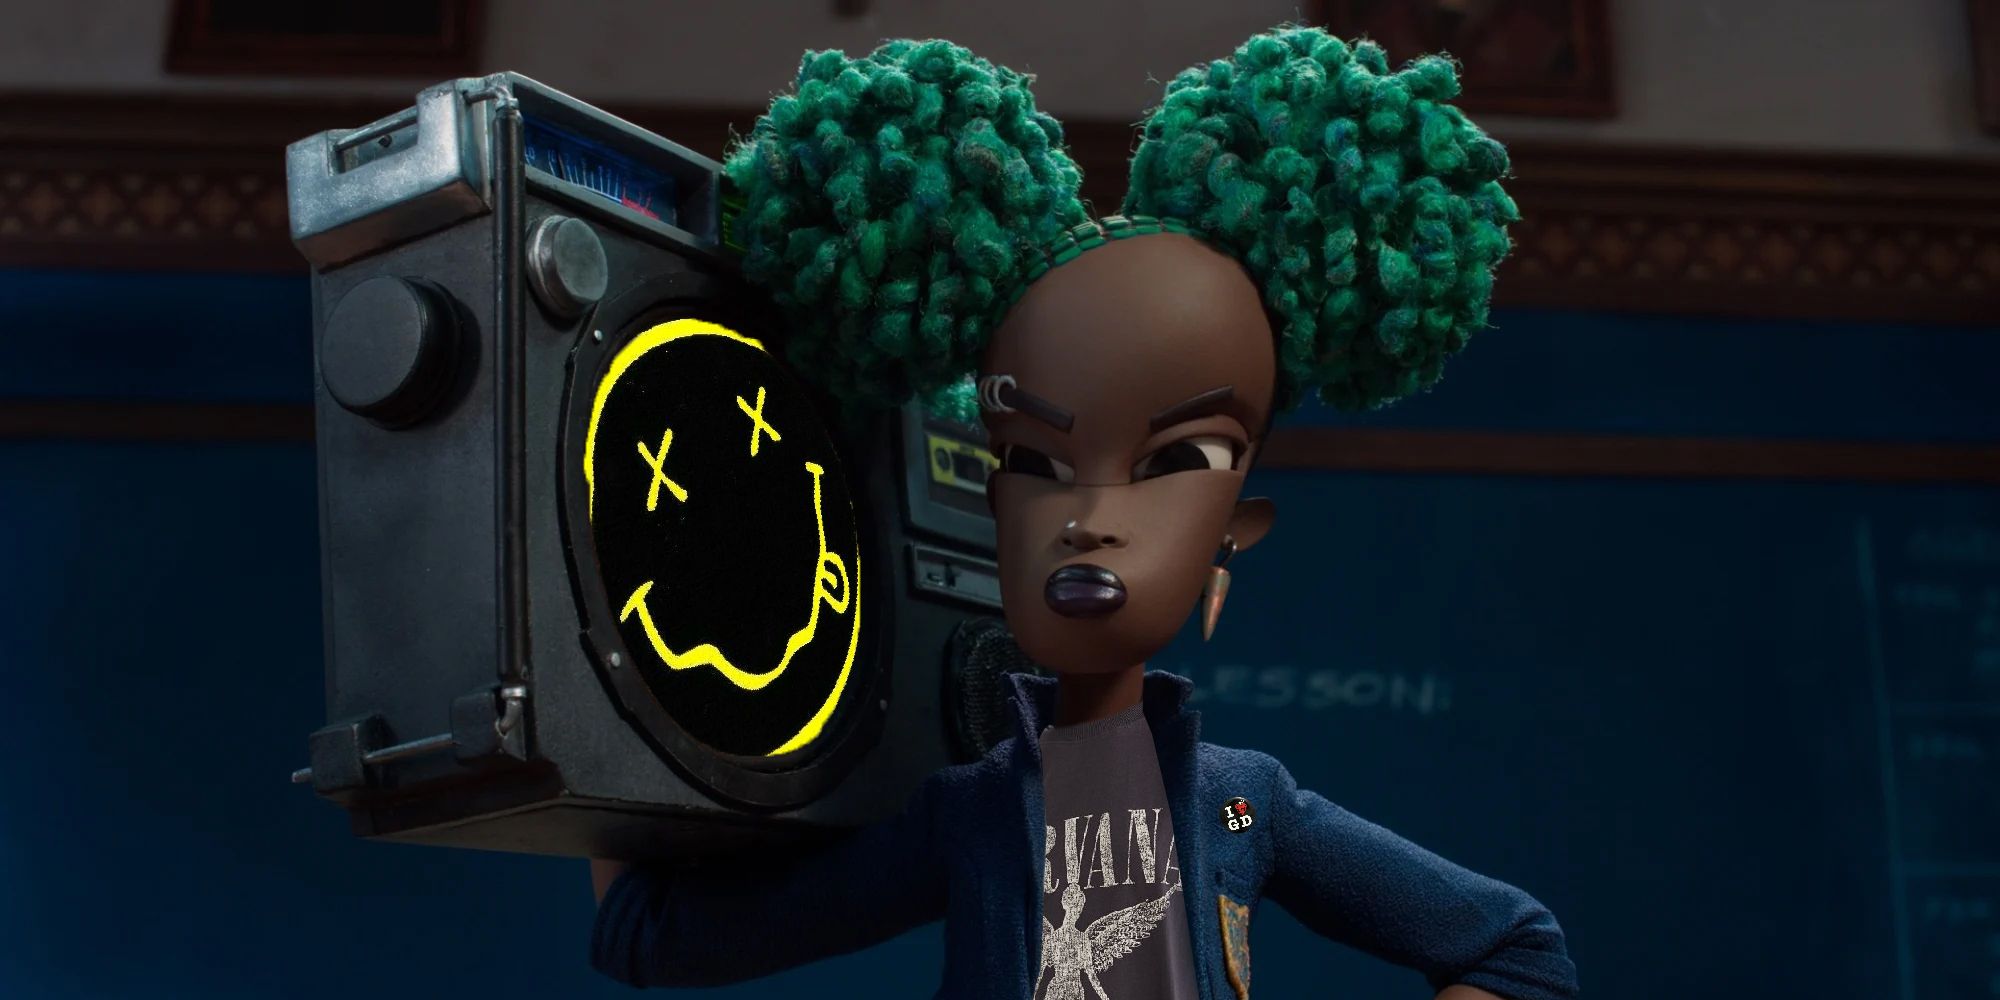 Kat from Wendell & Wild wearing a Nirvana t-shirt and holding a boombox with the eye replaced with the Nirvana smiley face